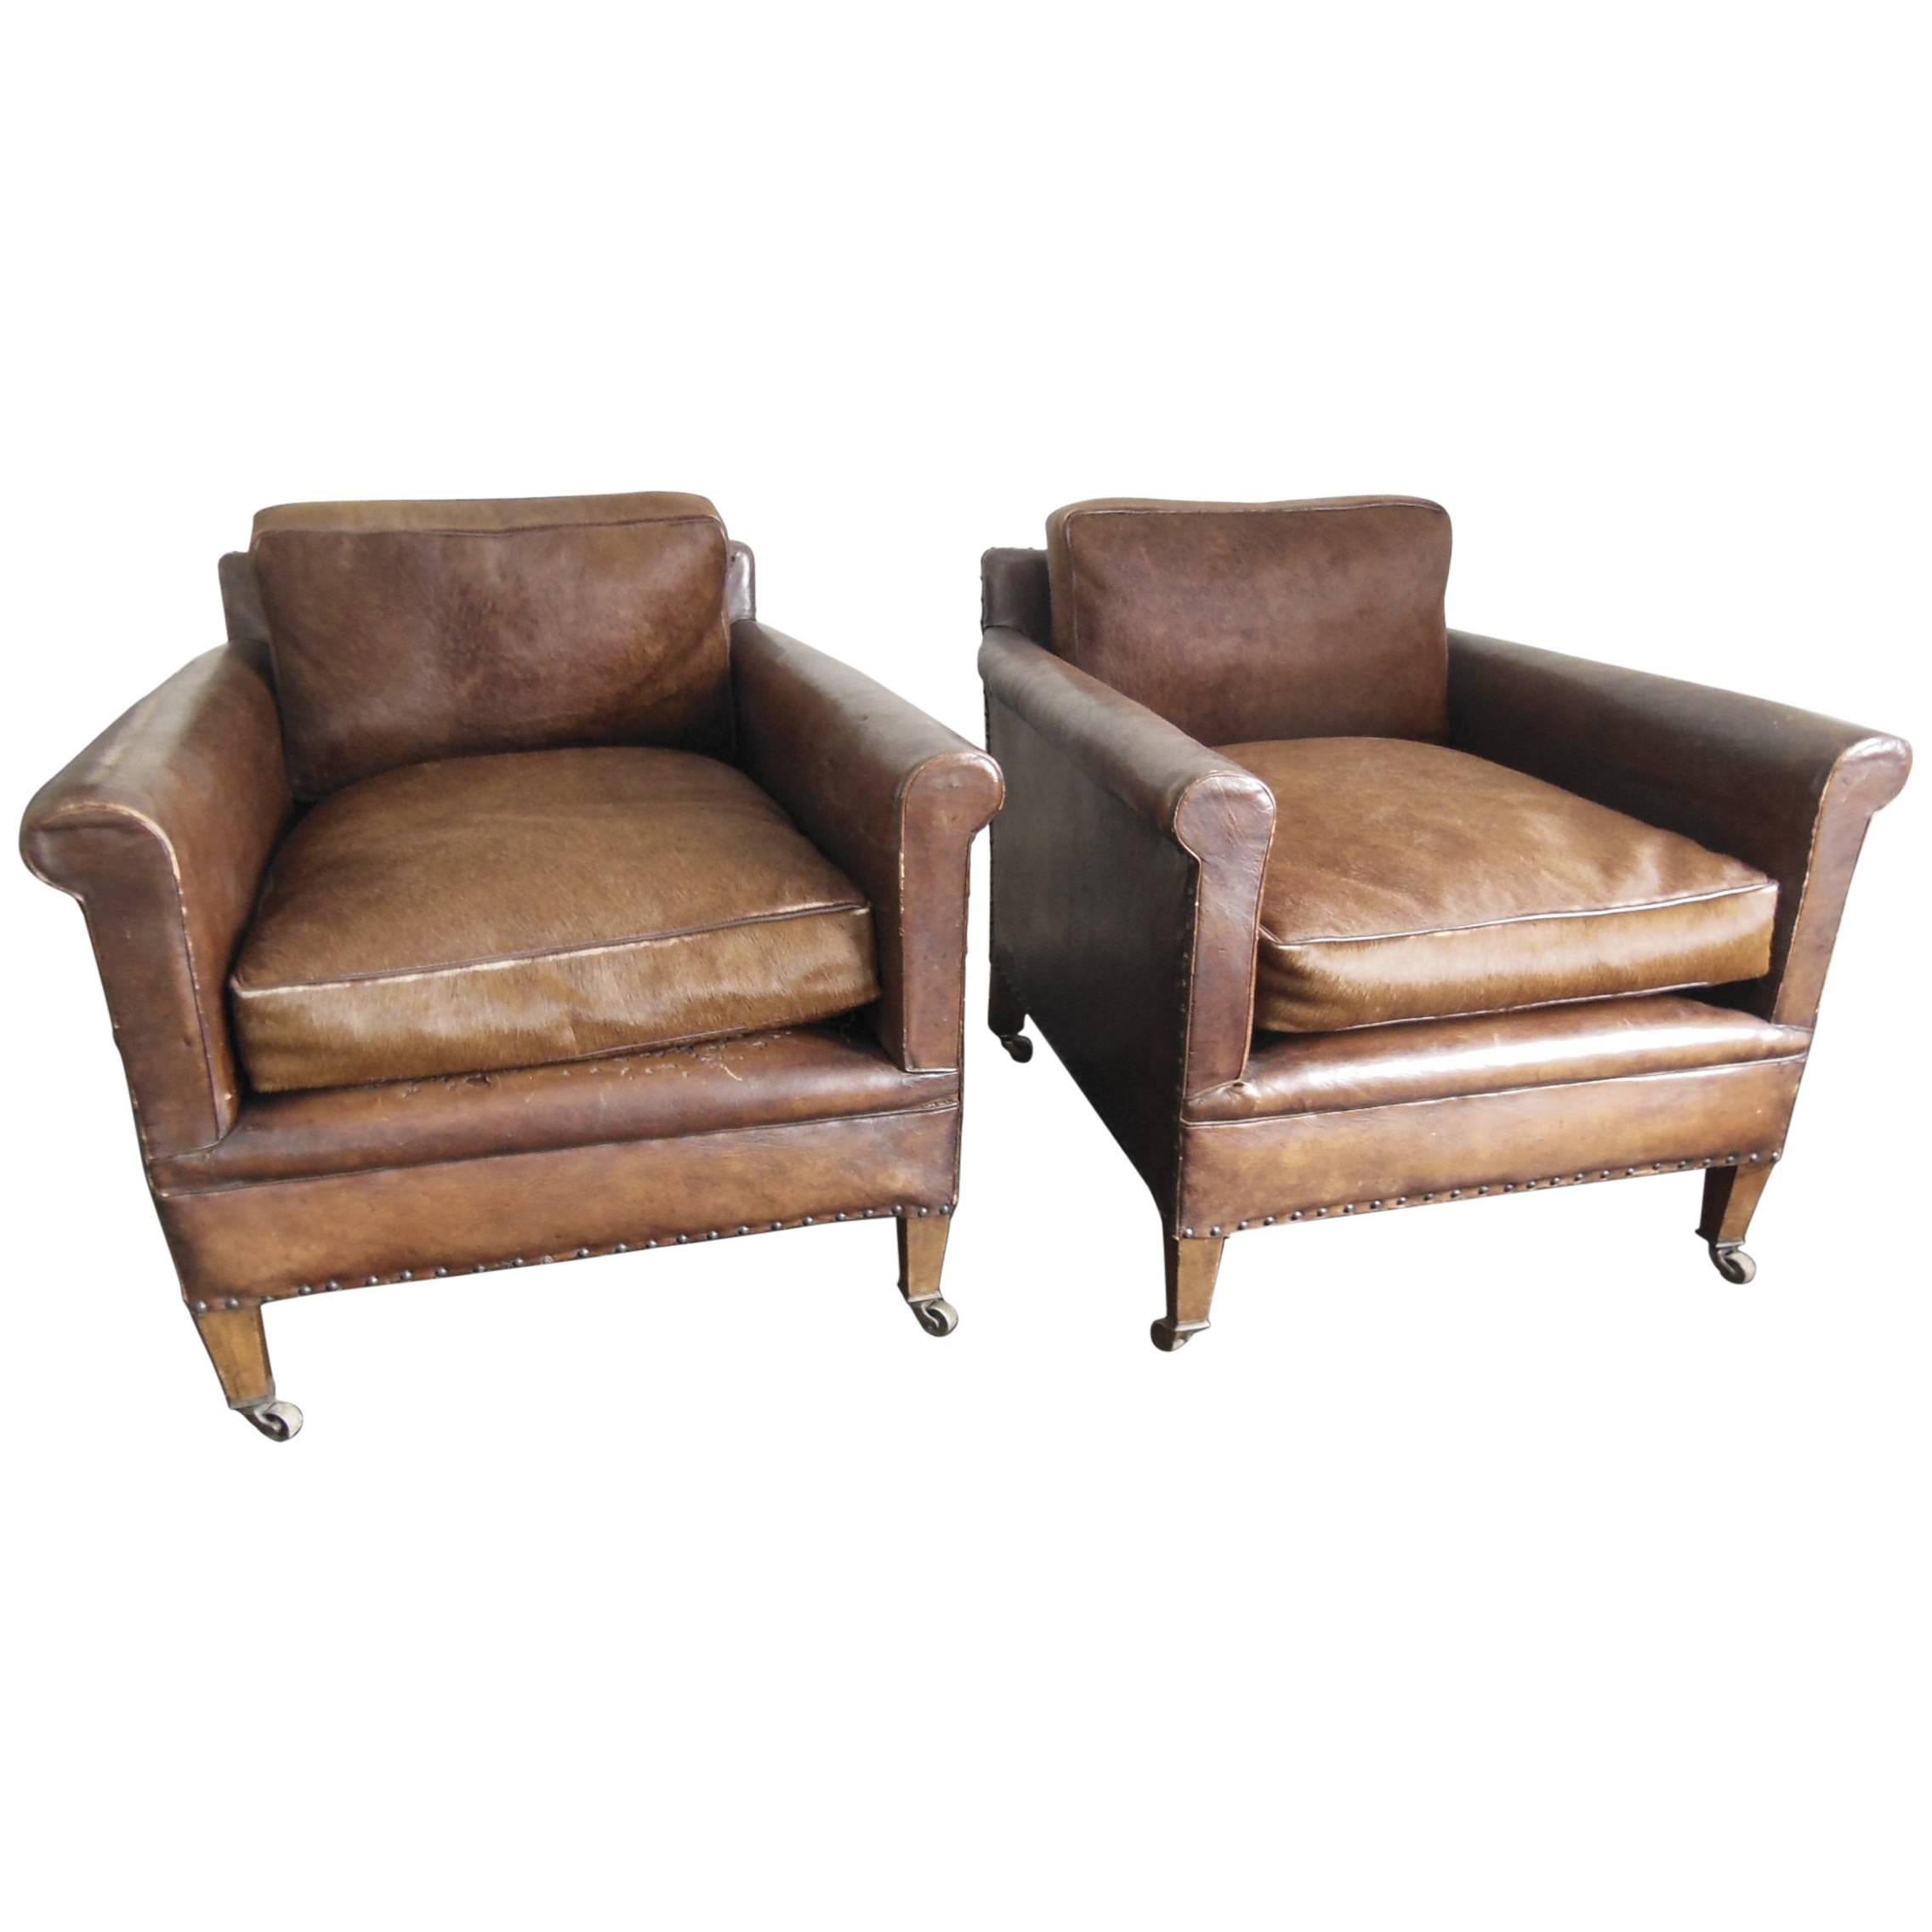 Fabulous Pair of French Vintage Leather Armchairs